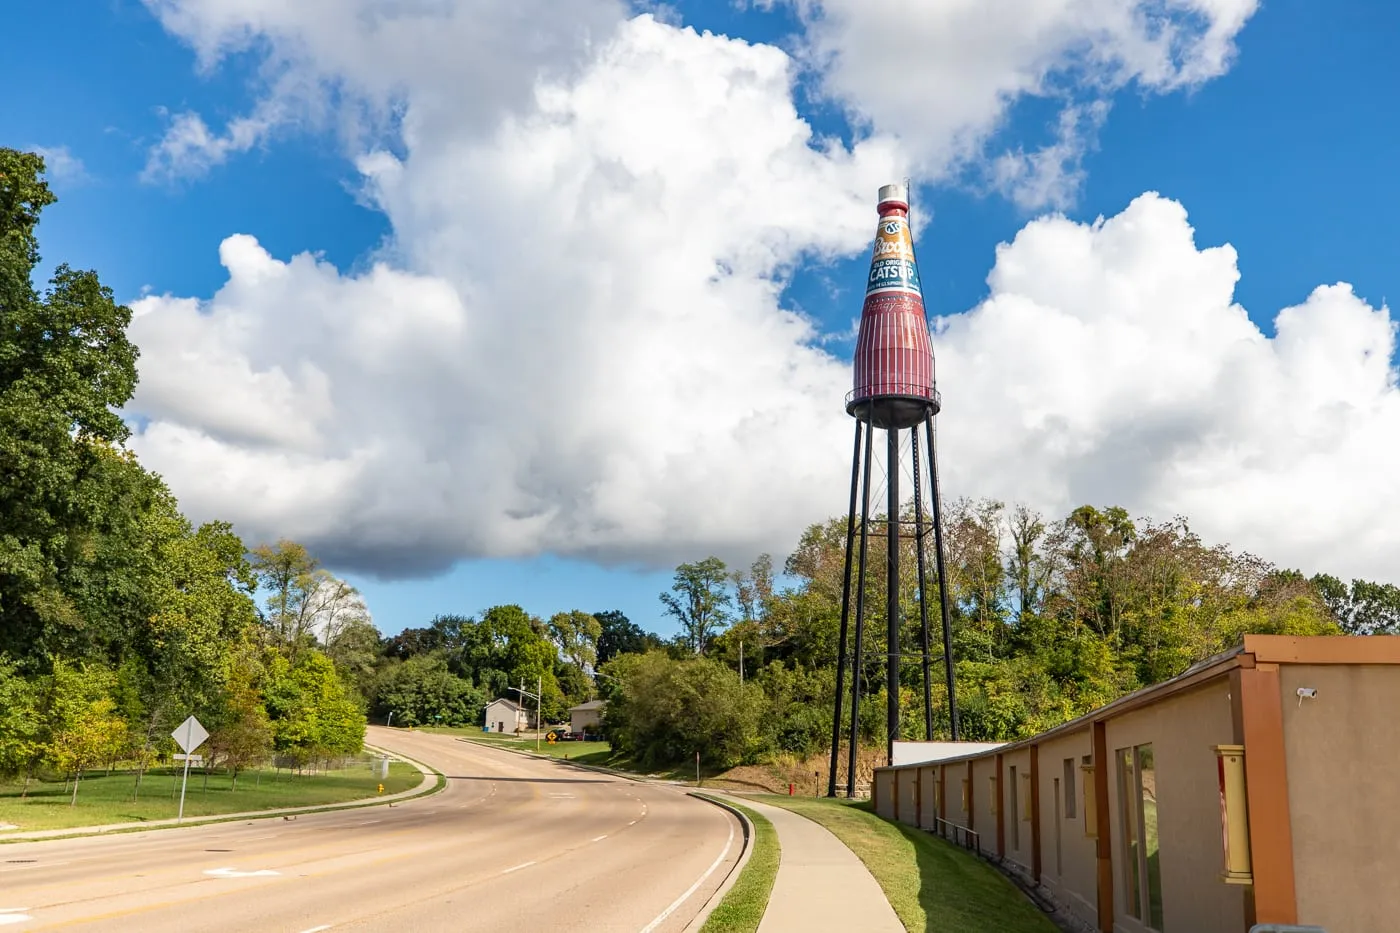 World's Largest Catsup Bottle in Collinsville, Illinois - Best Illinois Roadside Attractions